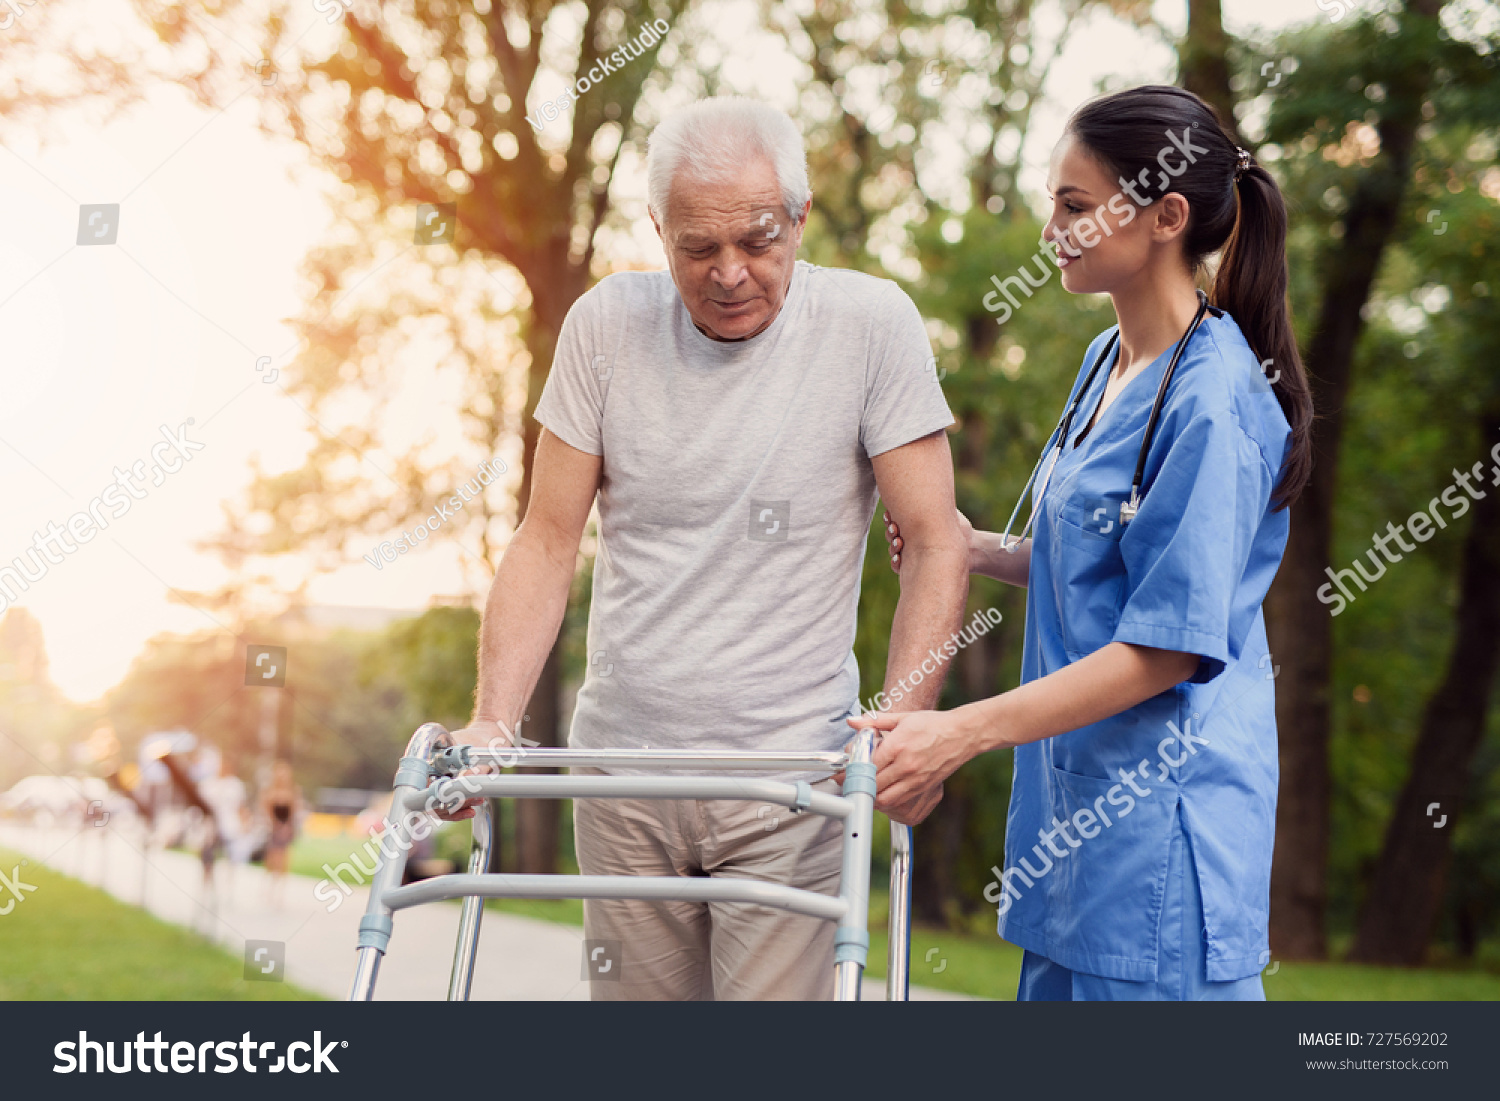 old man and his nurse